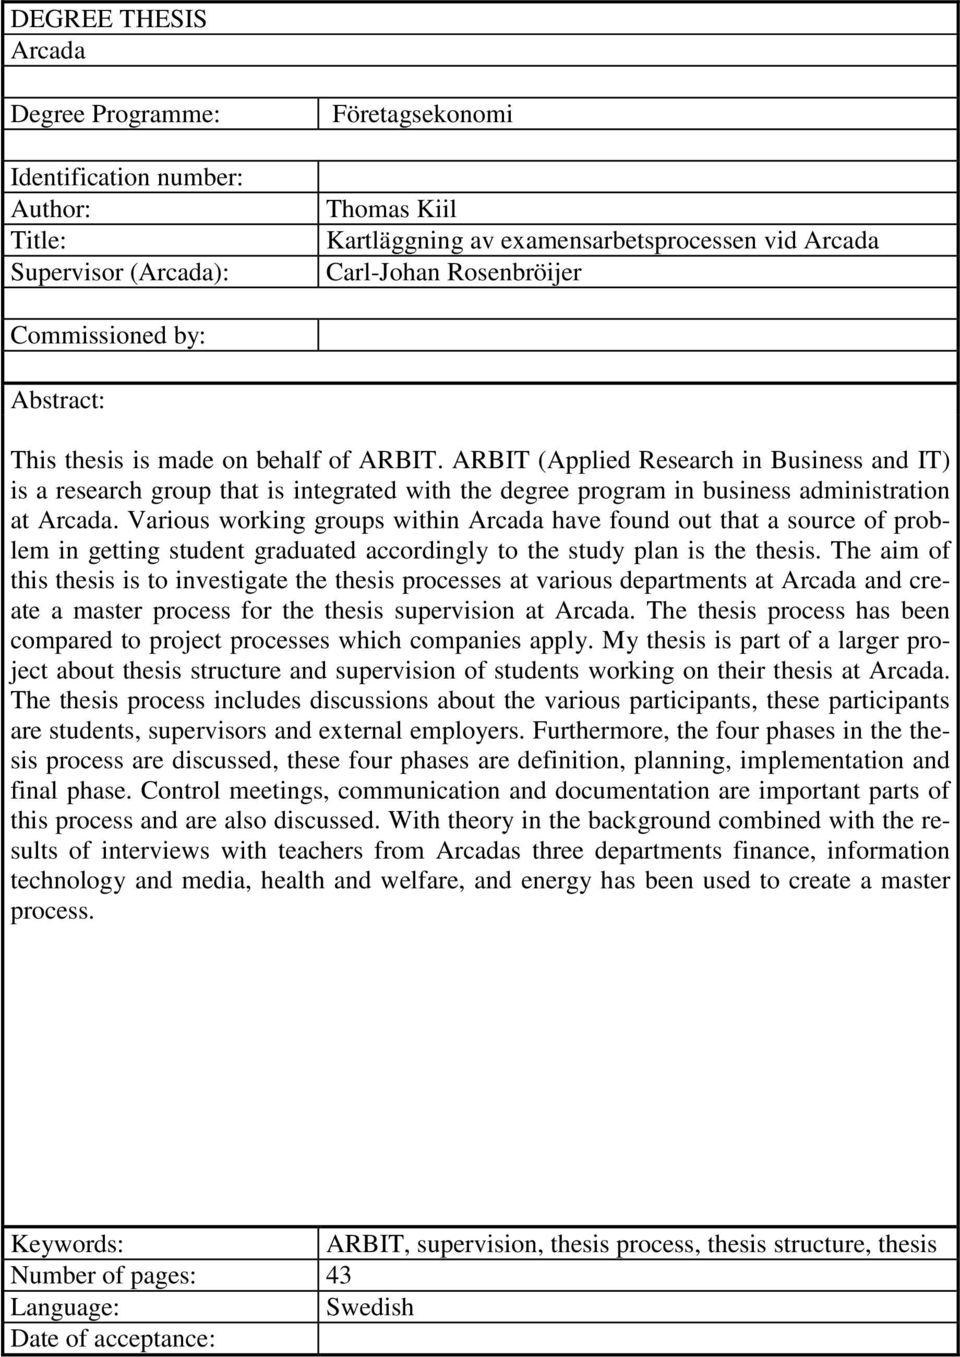 ARBIT (Applied Research in Business and IT) is a research group that is integrated with the degree program in business administration at Arcada.